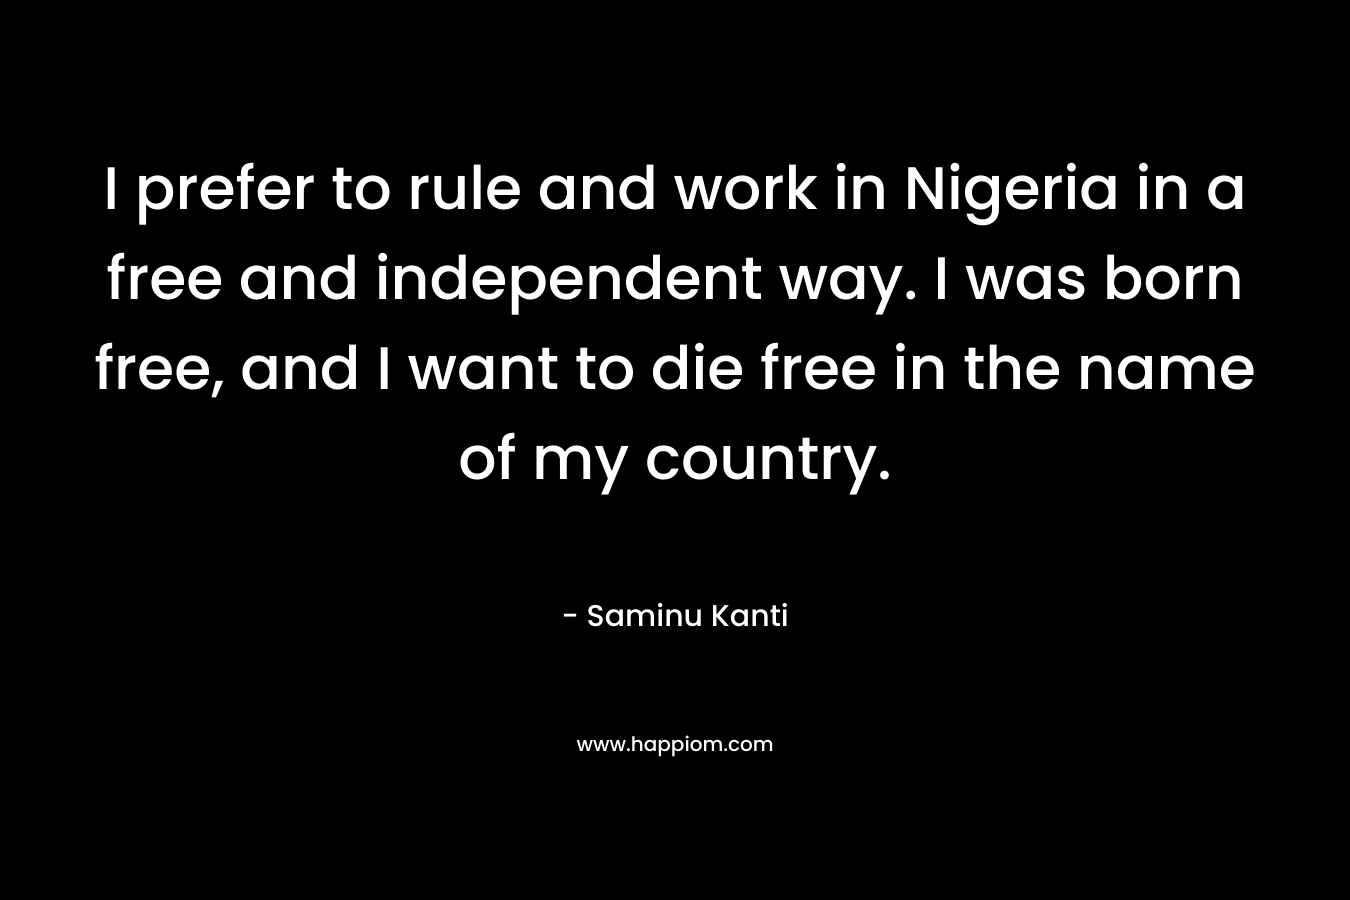 I prefer to rule and work in Nigeria in a free and independent way. I was born free, and I want to die free in the name of my country.